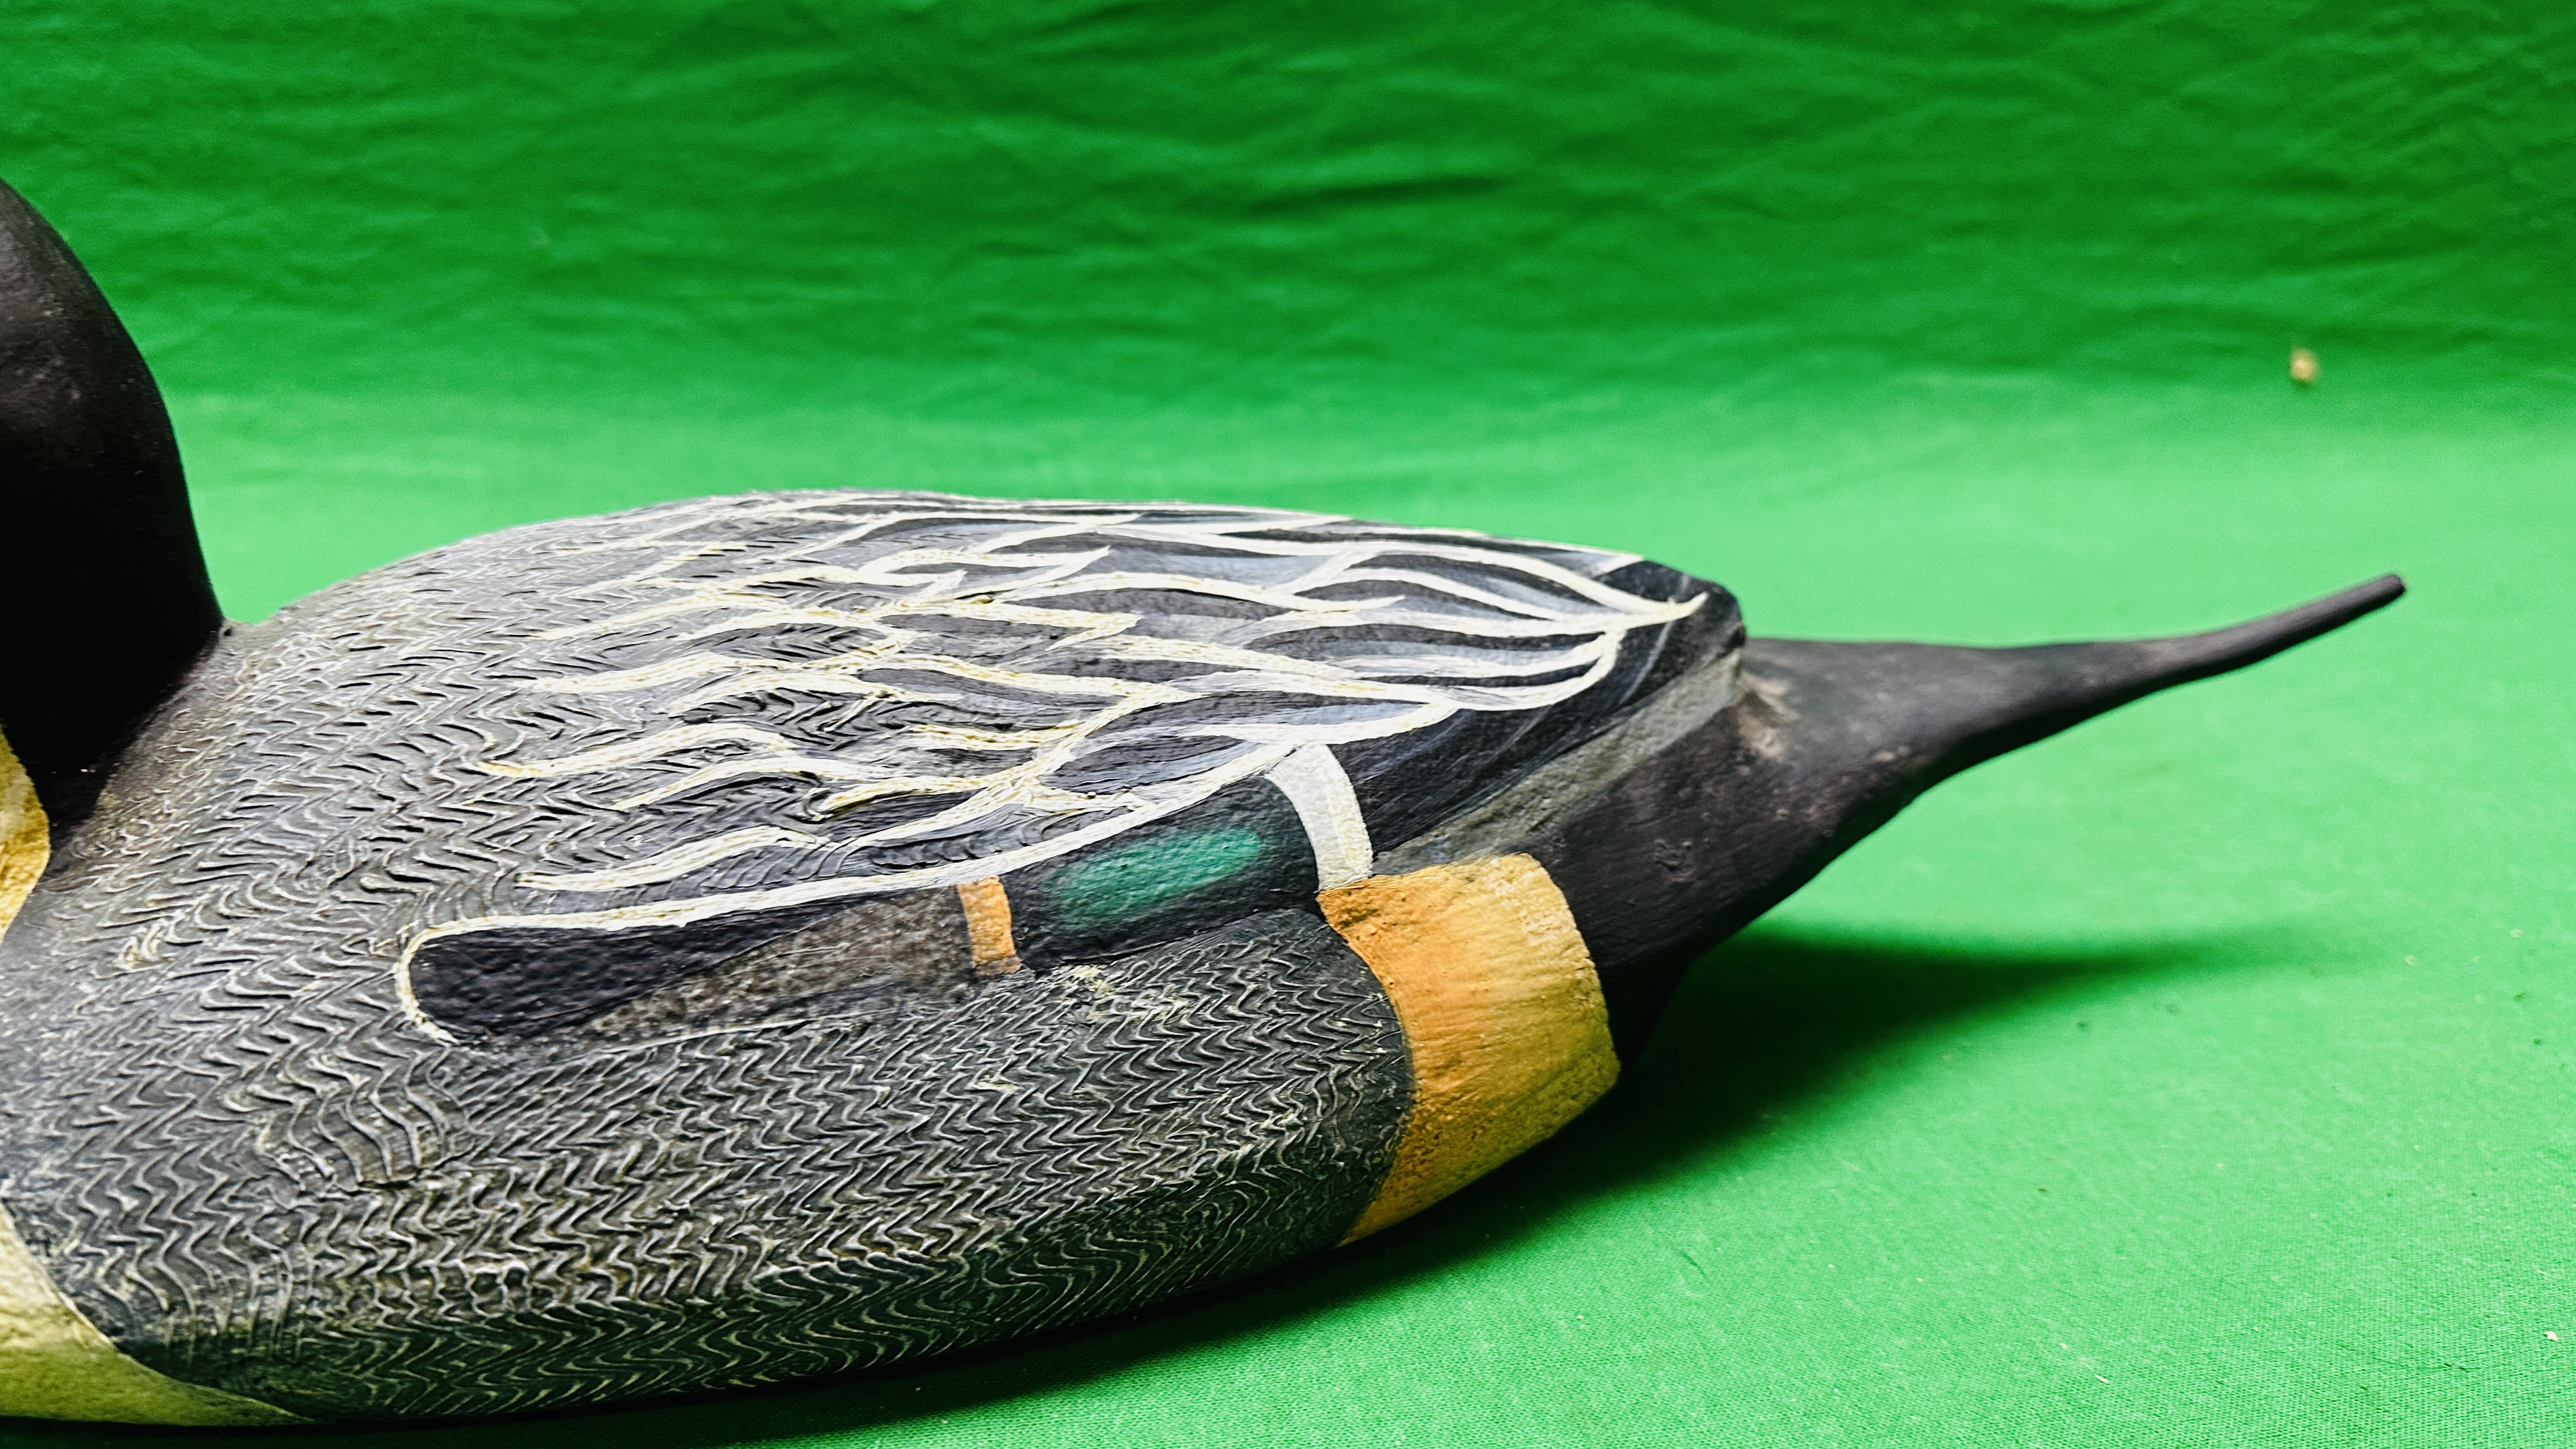 A HANDCRAFTED DUCK DECOY HAVING HANDPAINTED DETAIL AND GLASS EYES. - Image 8 of 10